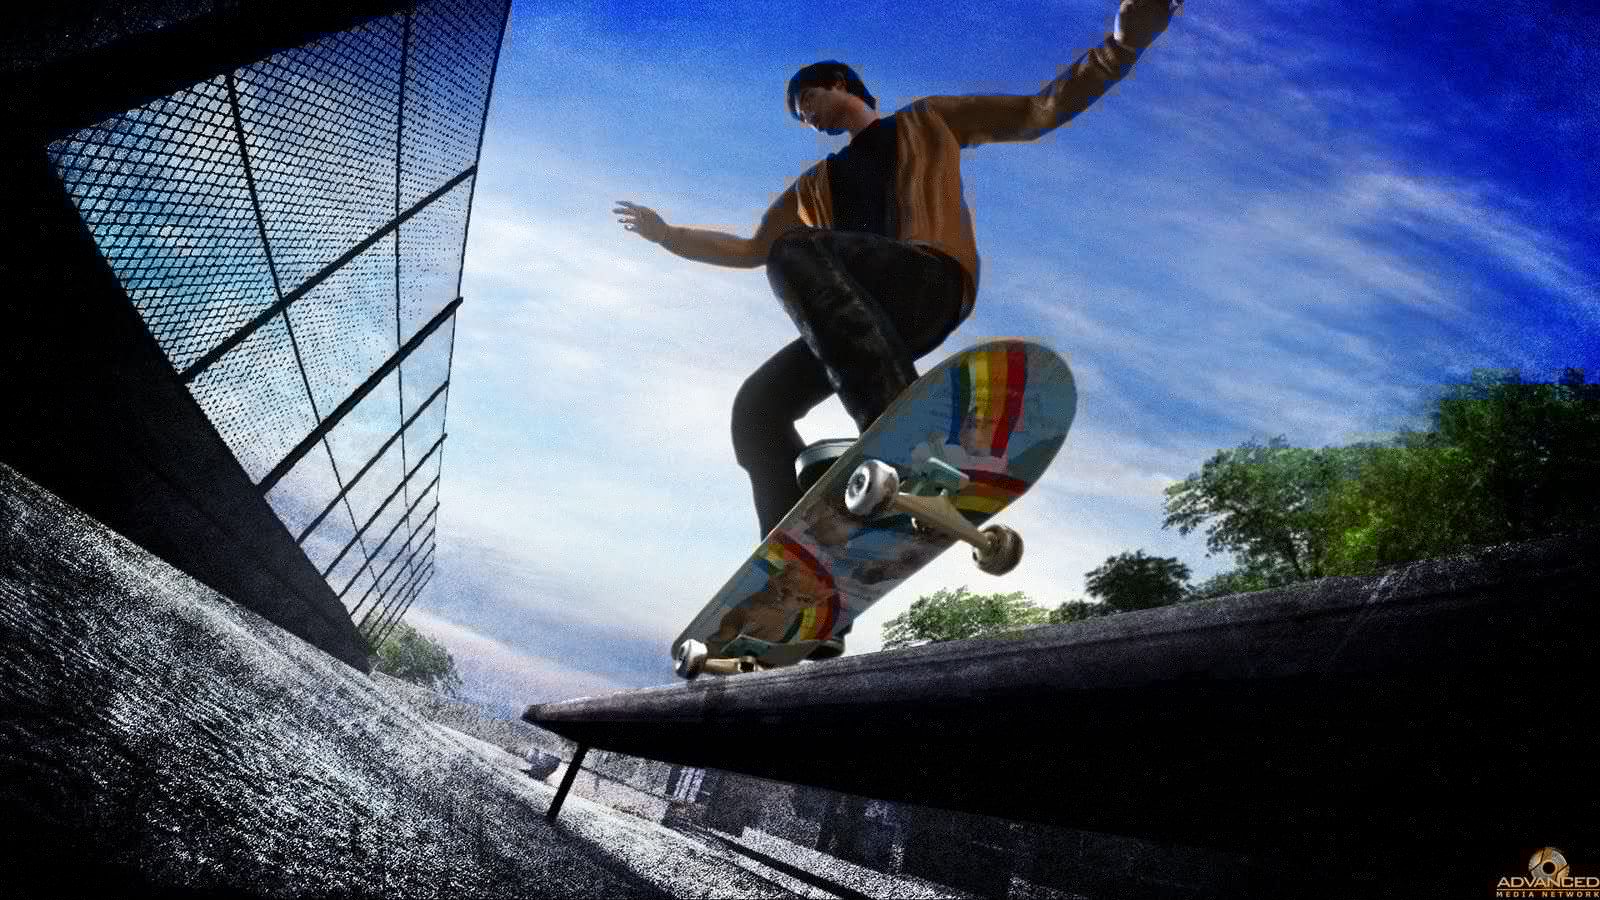 Skate 4 - Release date speculation, latest leaks, and everything we know